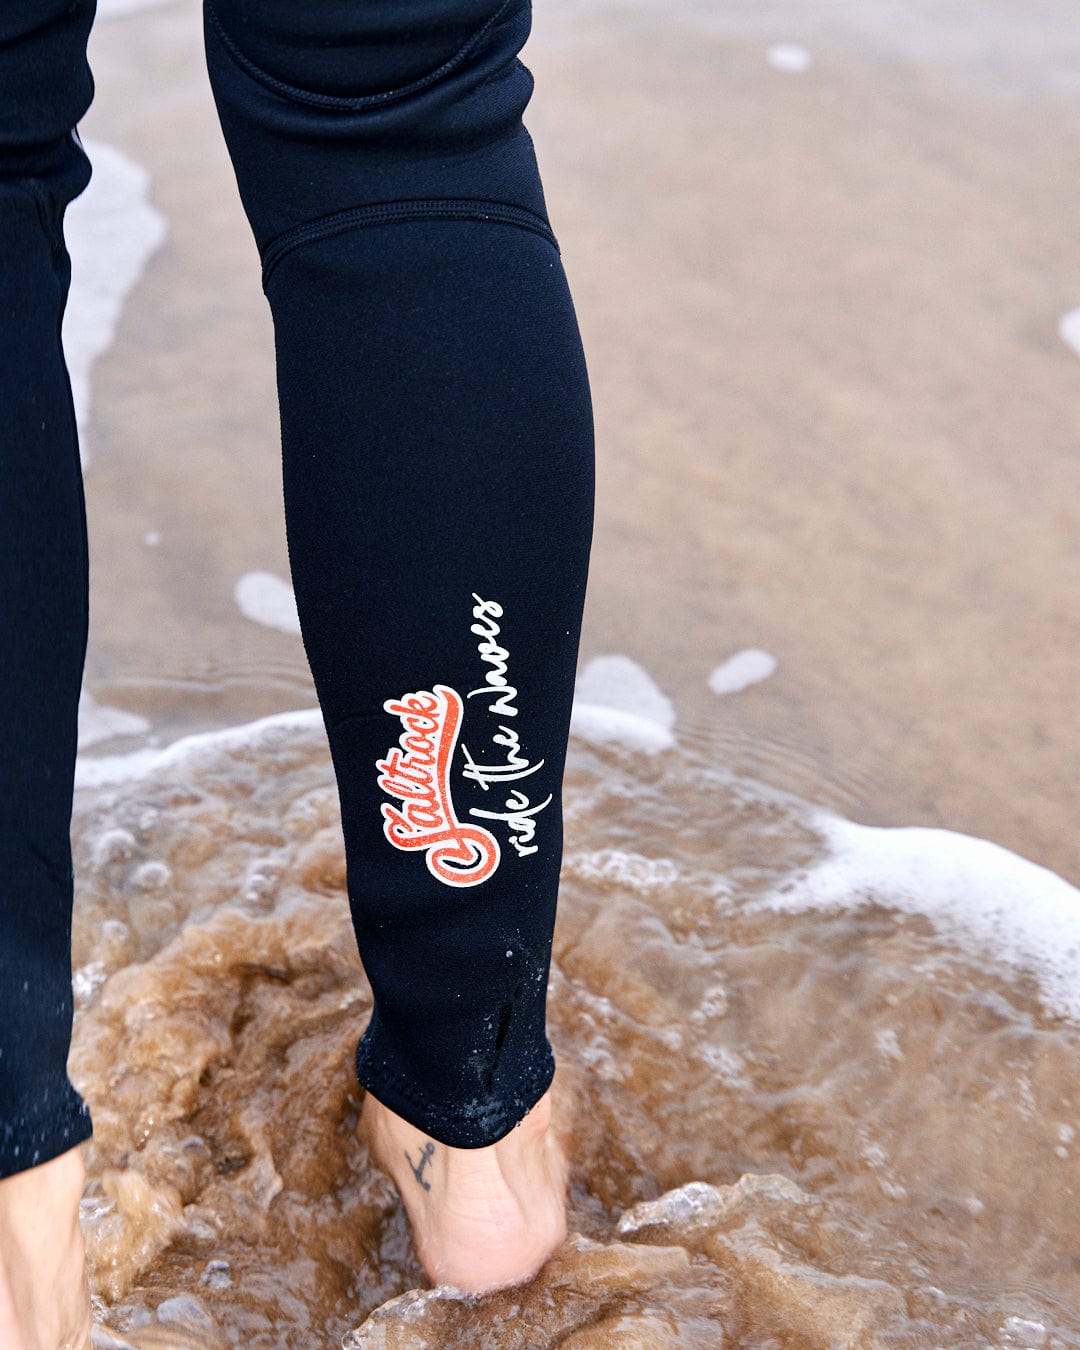 Close-up of a person's lower legs in black neoprene Saltrock wetsuit with "champion de la mer" written on them, standing in shallow ocean water.